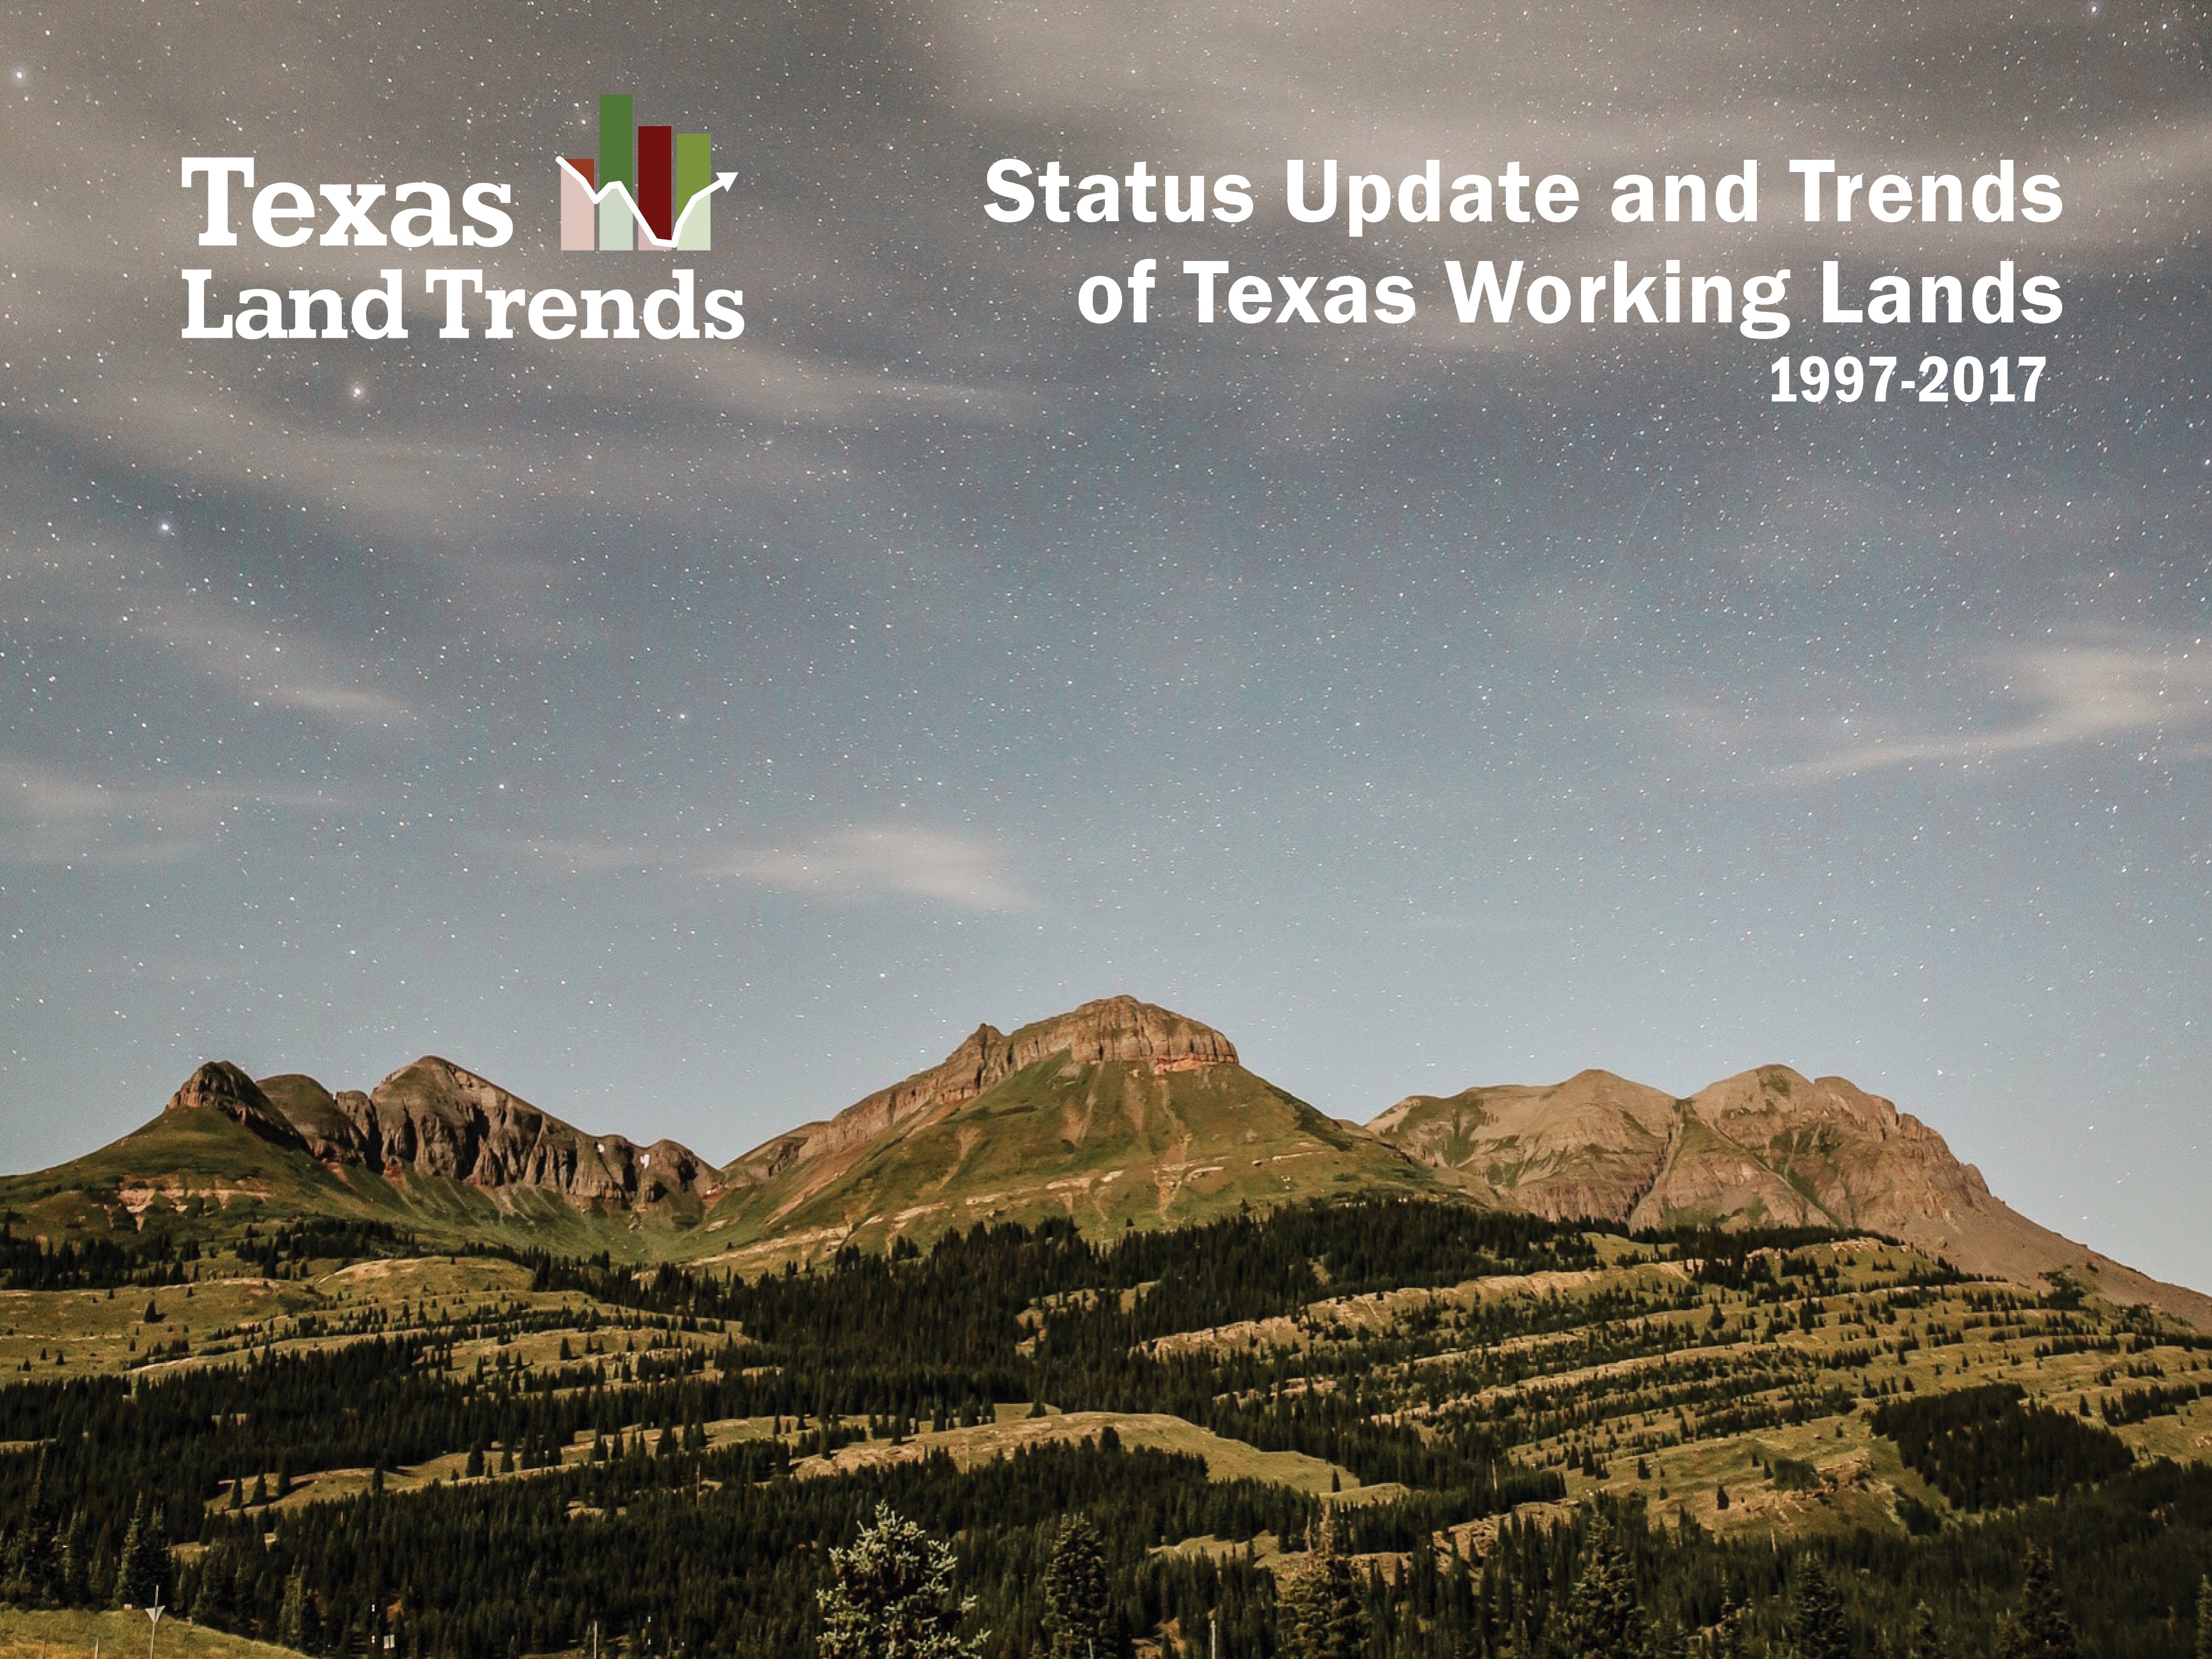 Status Update and Trends of Texas Working Lands report